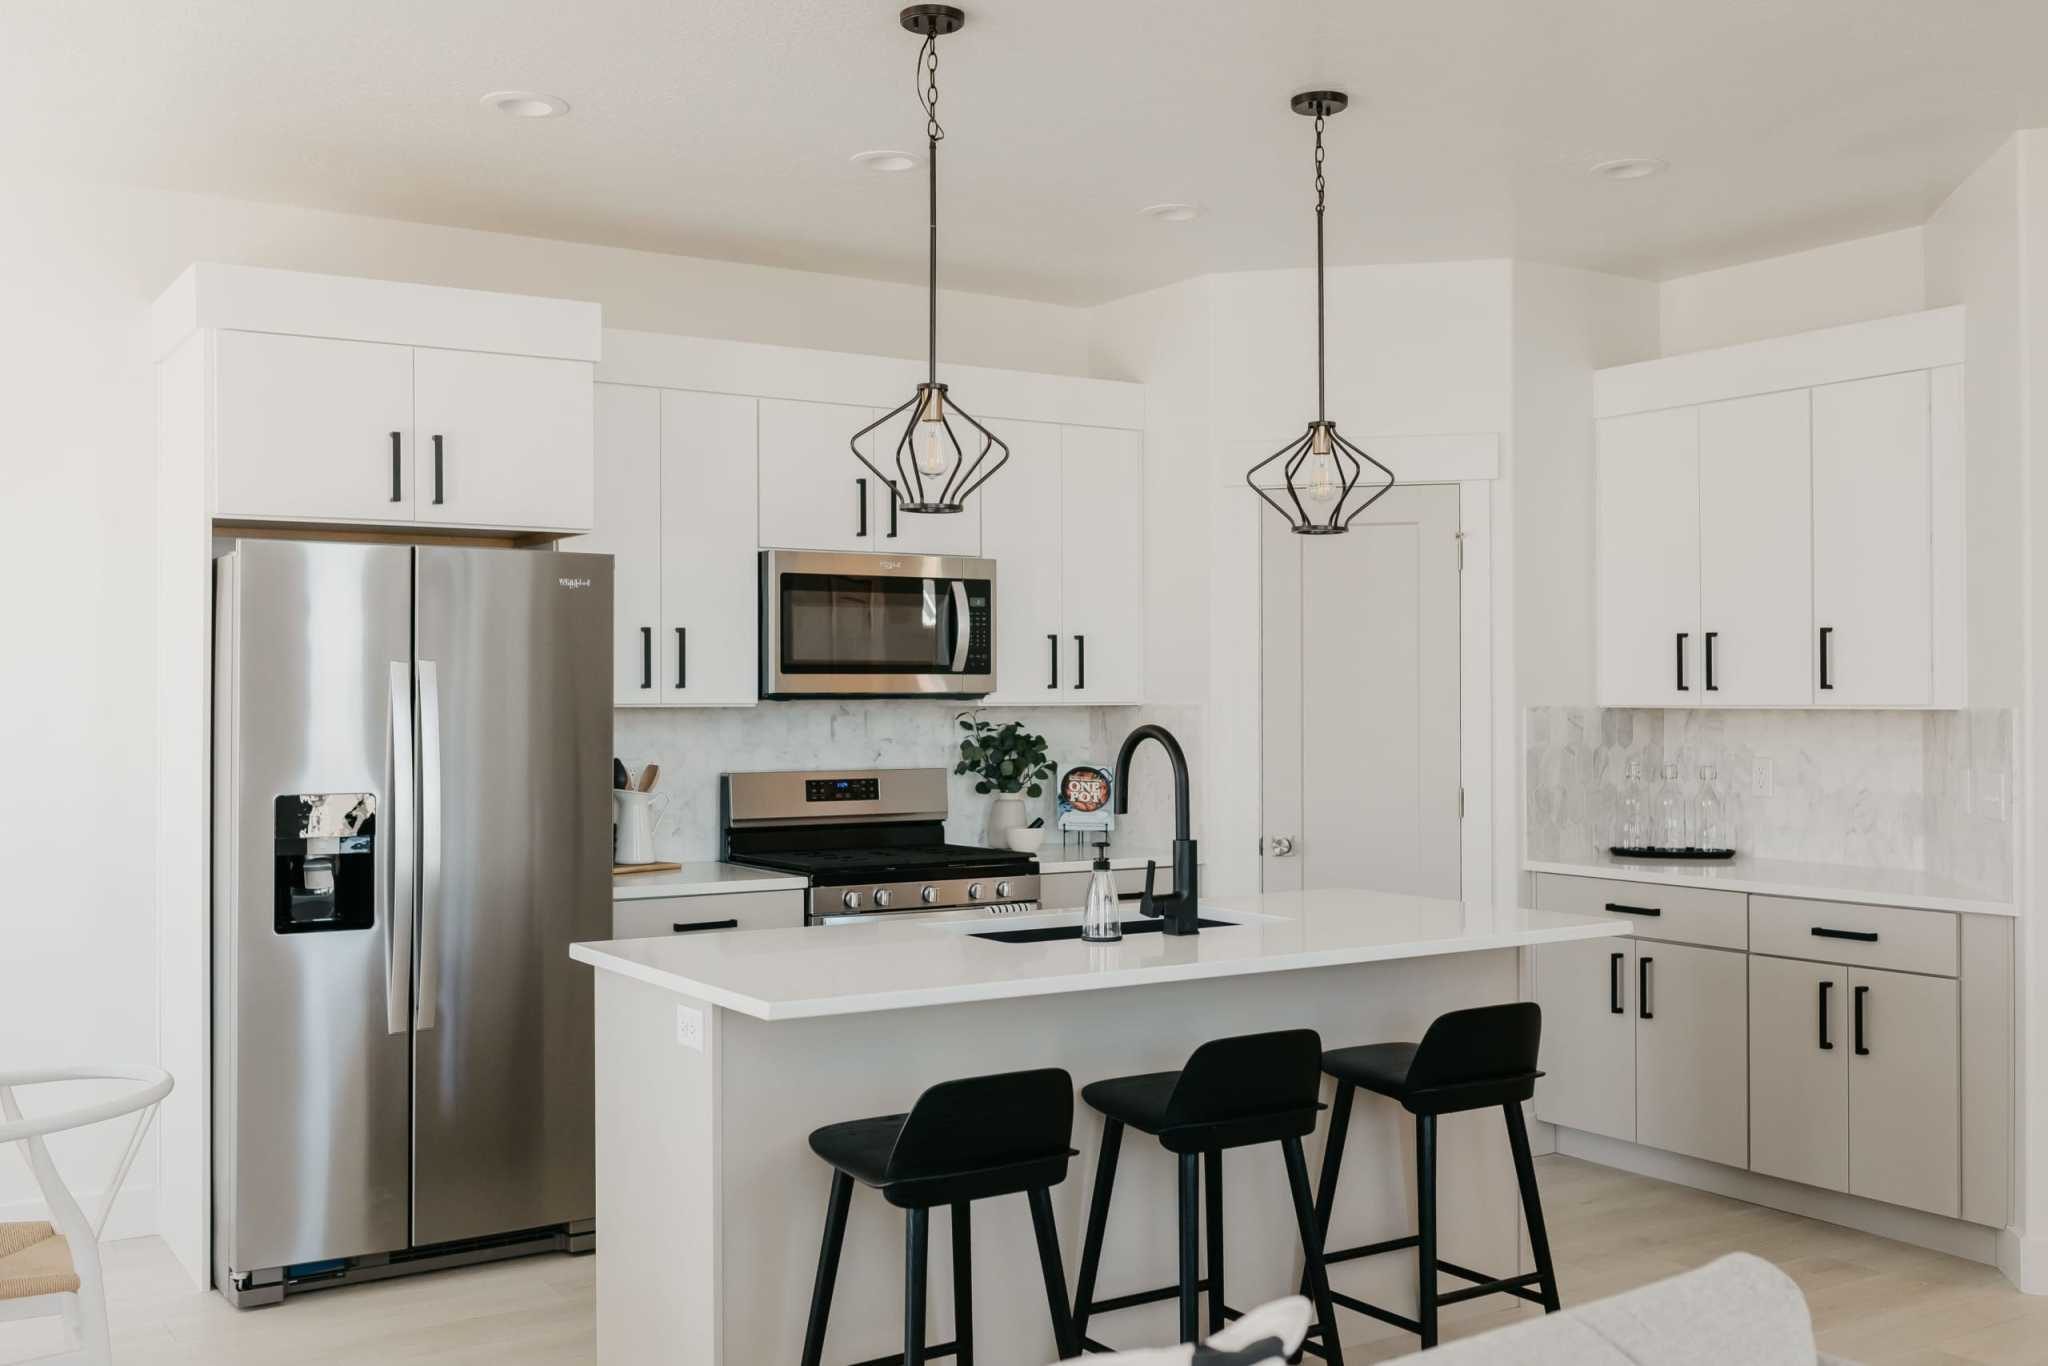 black pendant lights over a white kitchen island with black stools